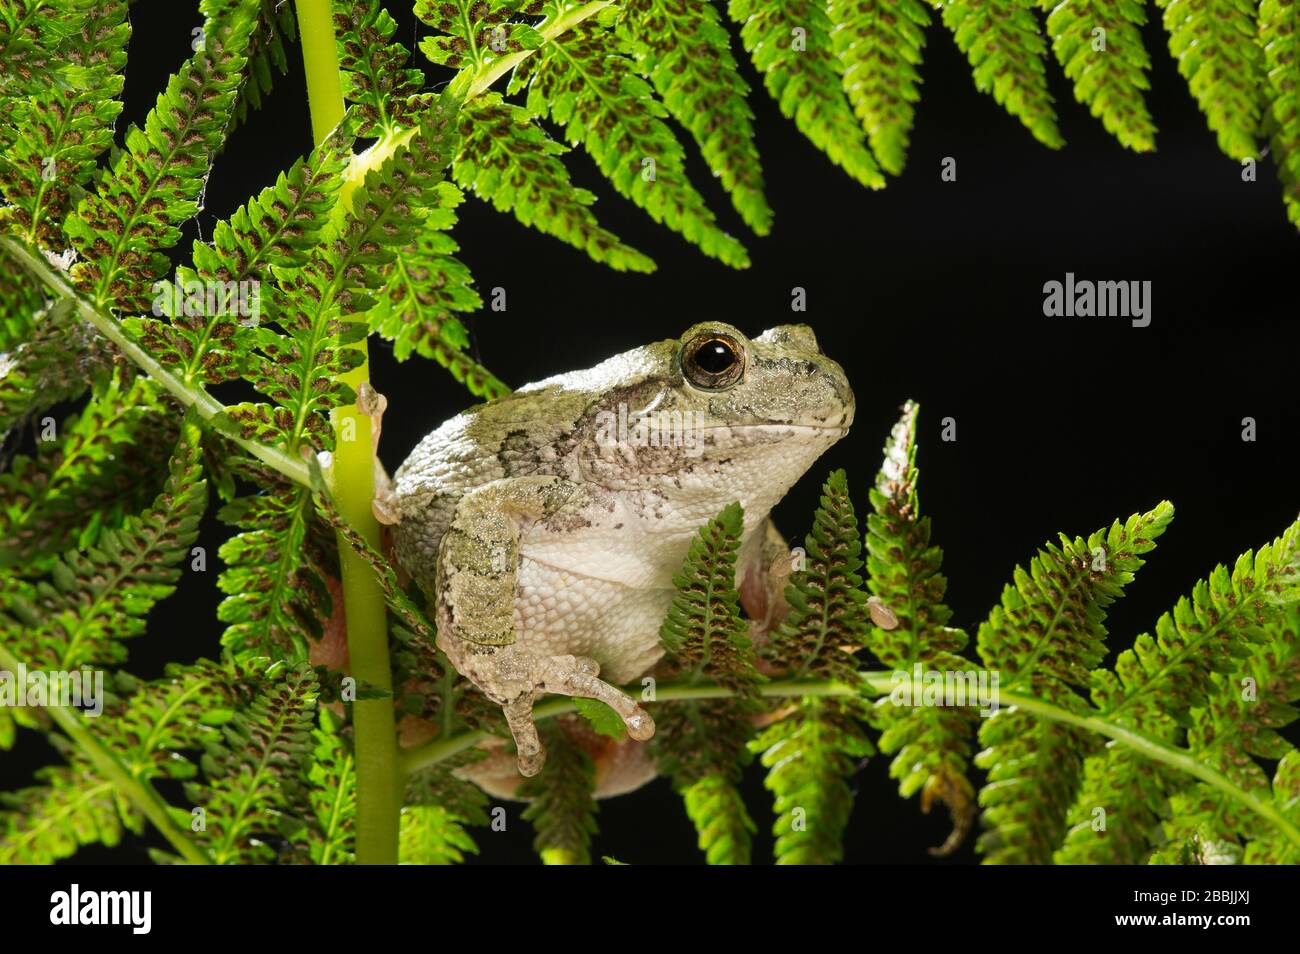 Gray Tree Frog (Hyla versicolor) resting on fern frond, E USA, by Dominique Braud/Dembinsky Photo Assoc Stock Photo